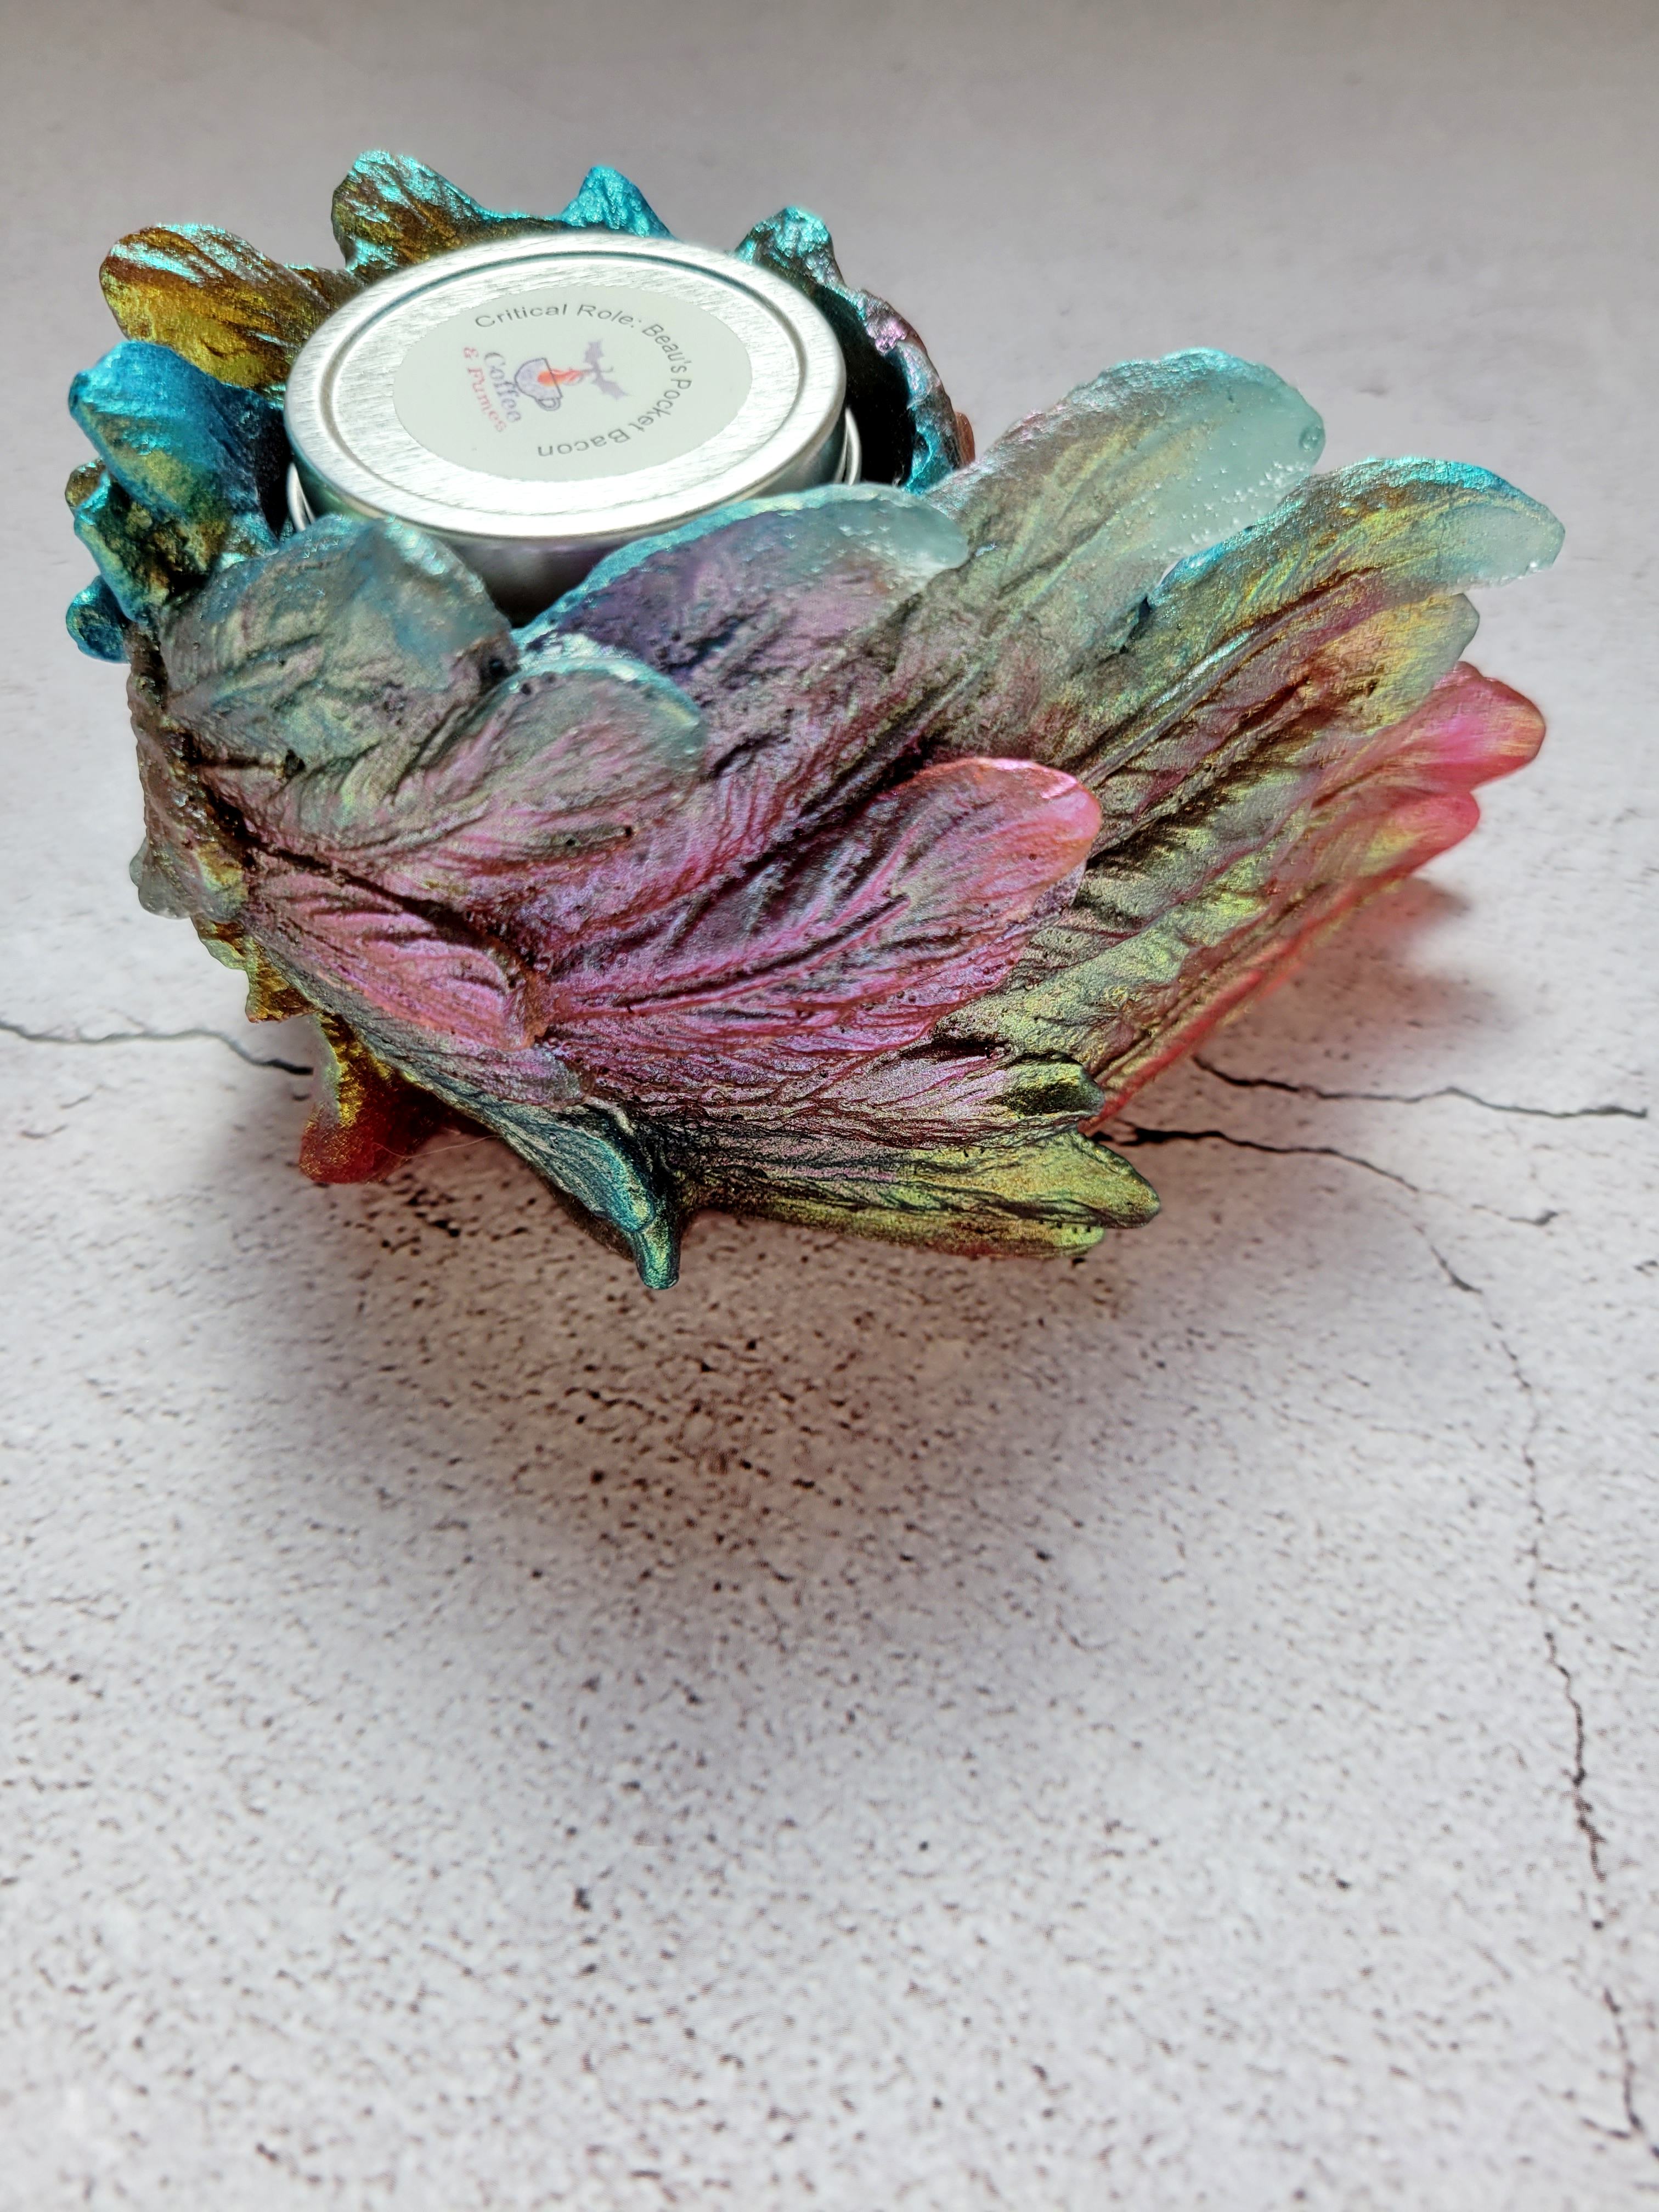 A side view of a tealight candle holder in the style of a bird's wing. It's feathers a textured. It's colorshifting reds, greens, blues. There's a tealight inside to show size comparison.